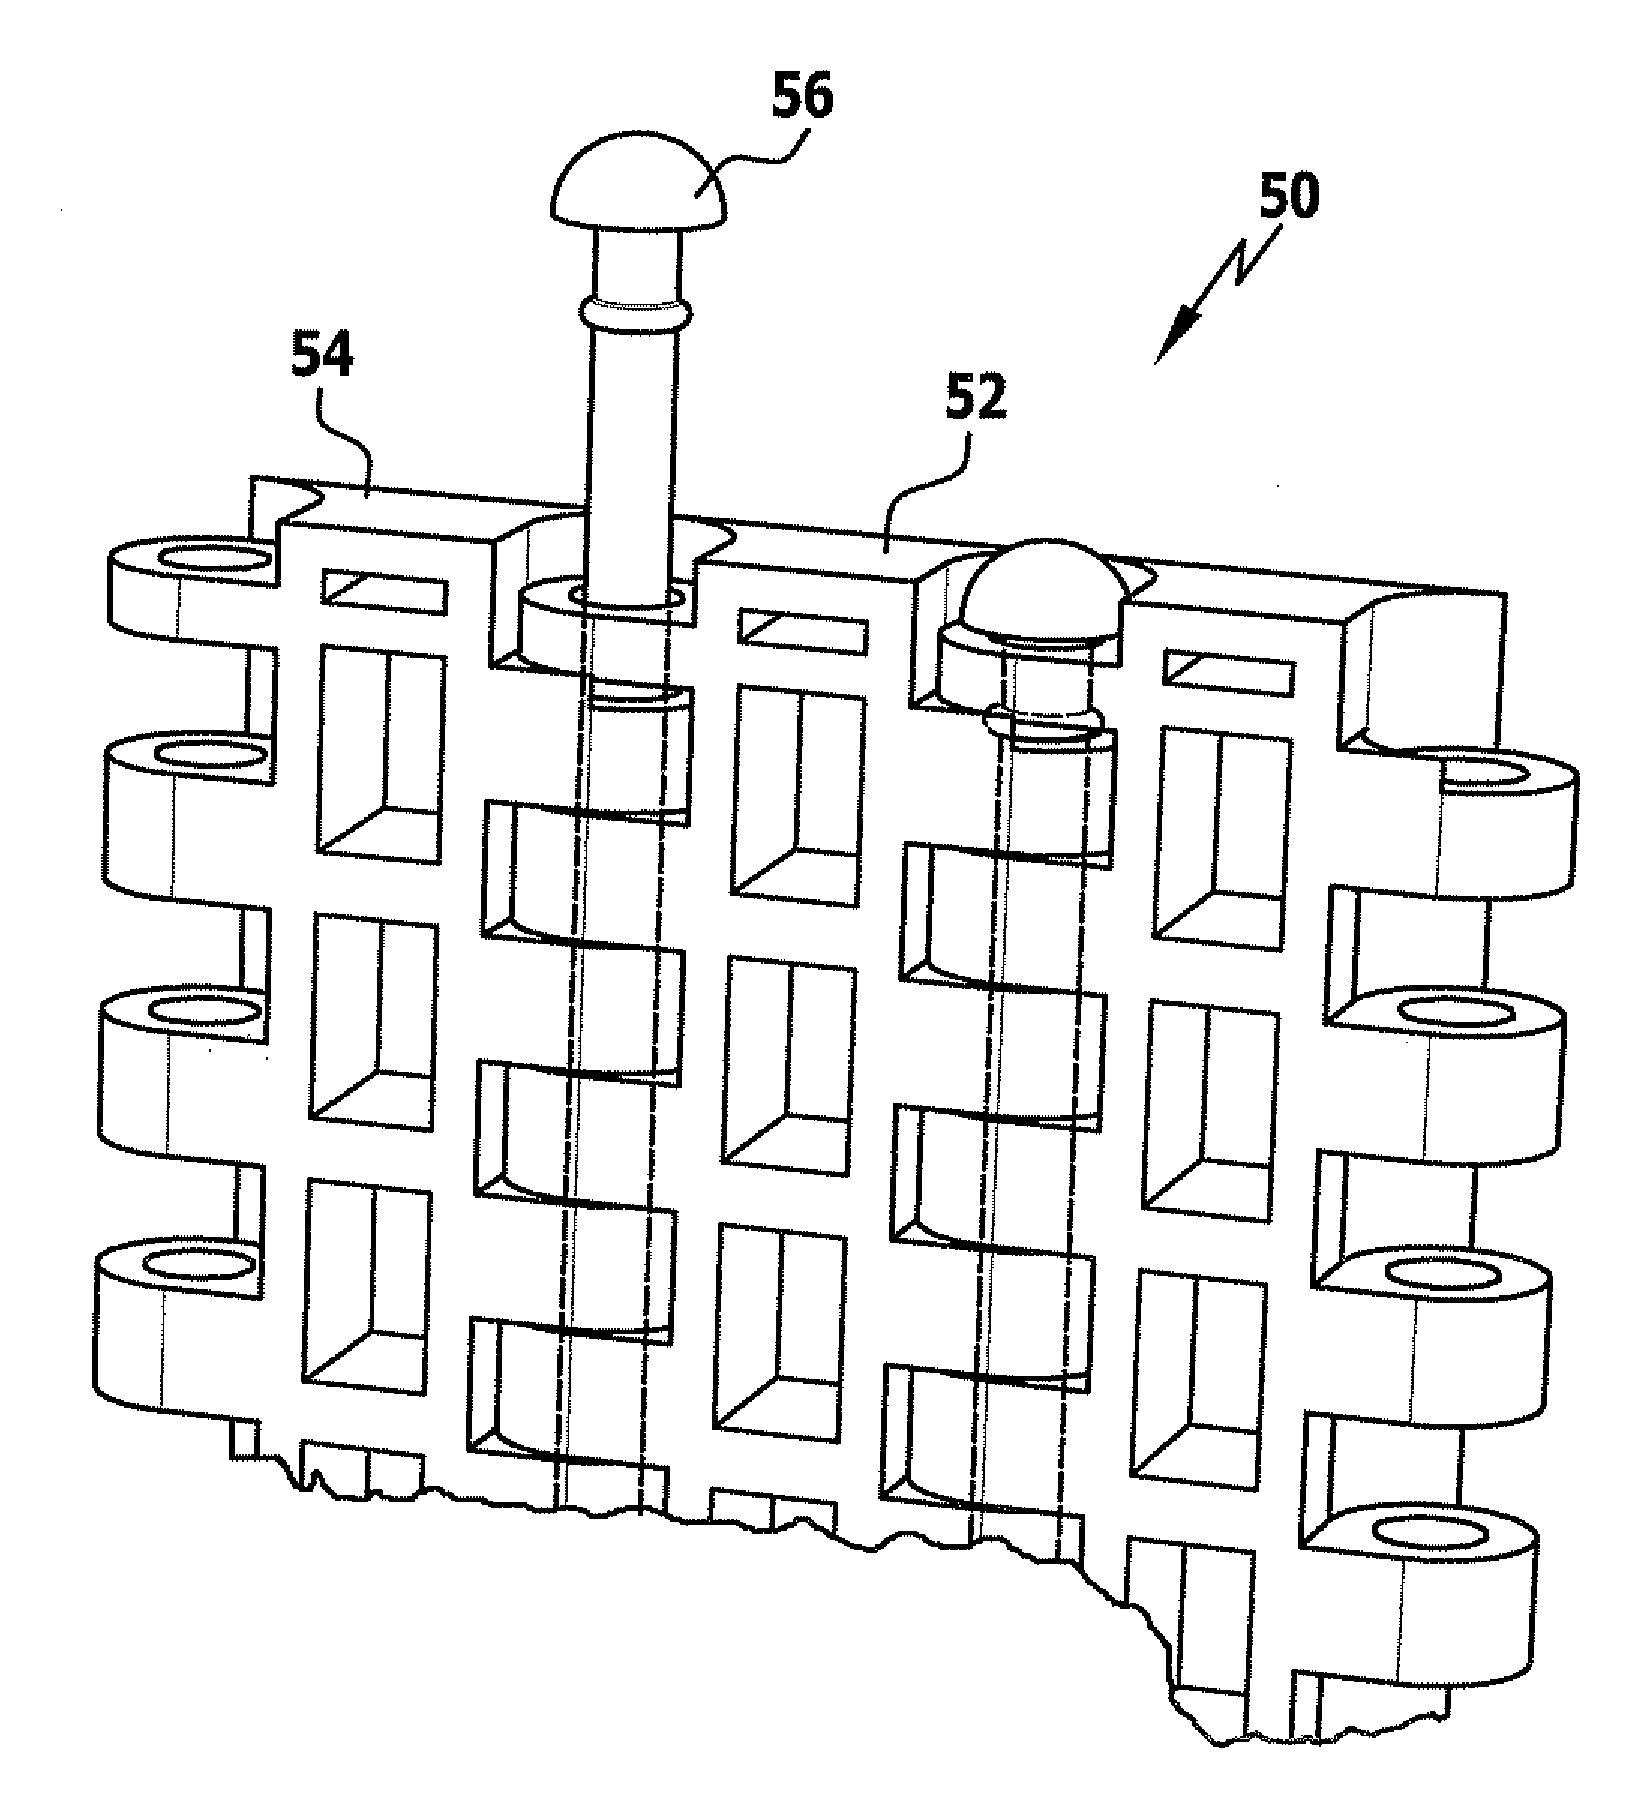 Method for the manufacture of rod-shaped components